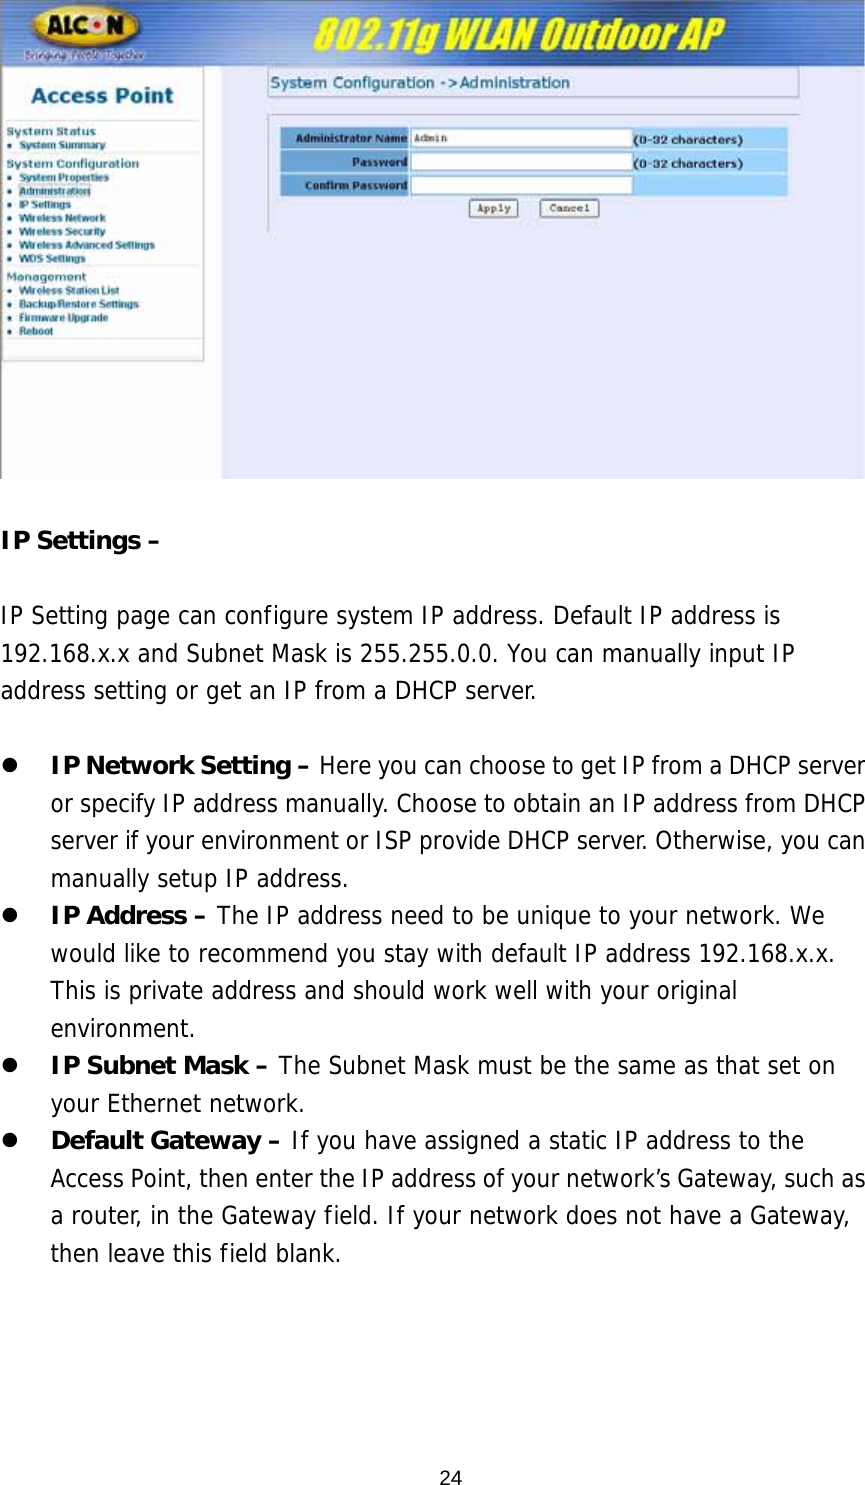   IP Settings –    IP Setting page can configure system IP address. Default IP address is 192.168.x.x and Subnet Mask is 255.255.0.0. You can manually input IP address setting or get an IP from a DHCP server.  z IP Network Setting – Here you can choose to get IP from a DHCP server or specify IP address manually. Choose to obtain an IP address from DHCP server if your environment or ISP provide DHCP server. Otherwise, you can manually setup IP address. z IP Address – The IP address need to be unique to your network. We would like to recommend you stay with default IP address 192.168.x.x. This is private address and should work well with your original environment. z IP Subnet Mask – The Subnet Mask must be the same as that set on your Ethernet network. z Default Gateway – If you have assigned a static IP address to the Access Point, then enter the IP address of your network’s Gateway, such as a router, in the Gateway field. If your network does not have a Gateway, then leave this field blank.  24